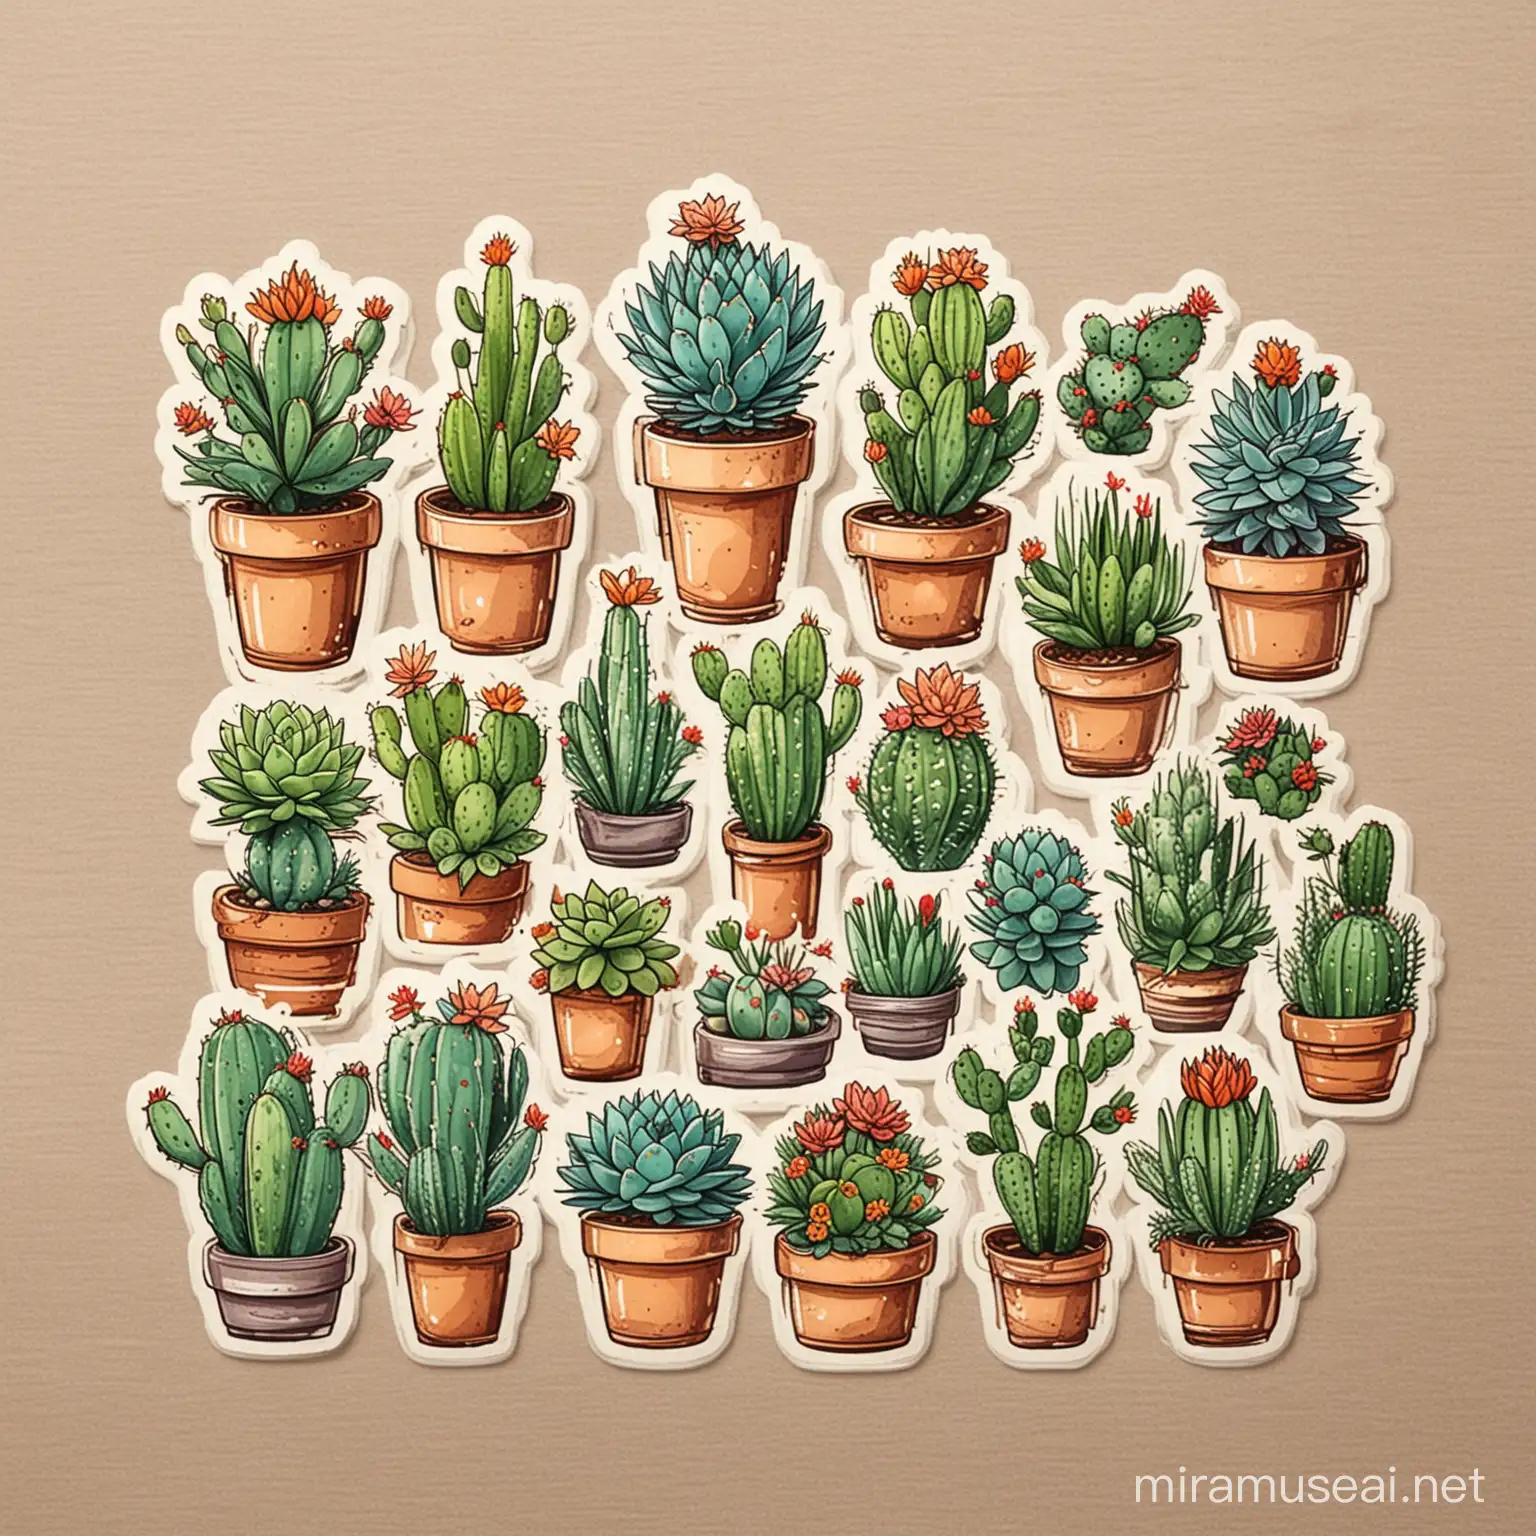 Collection of 20 Beautiful Succulent Cactus Vector Stickers for Crafting and Decorating